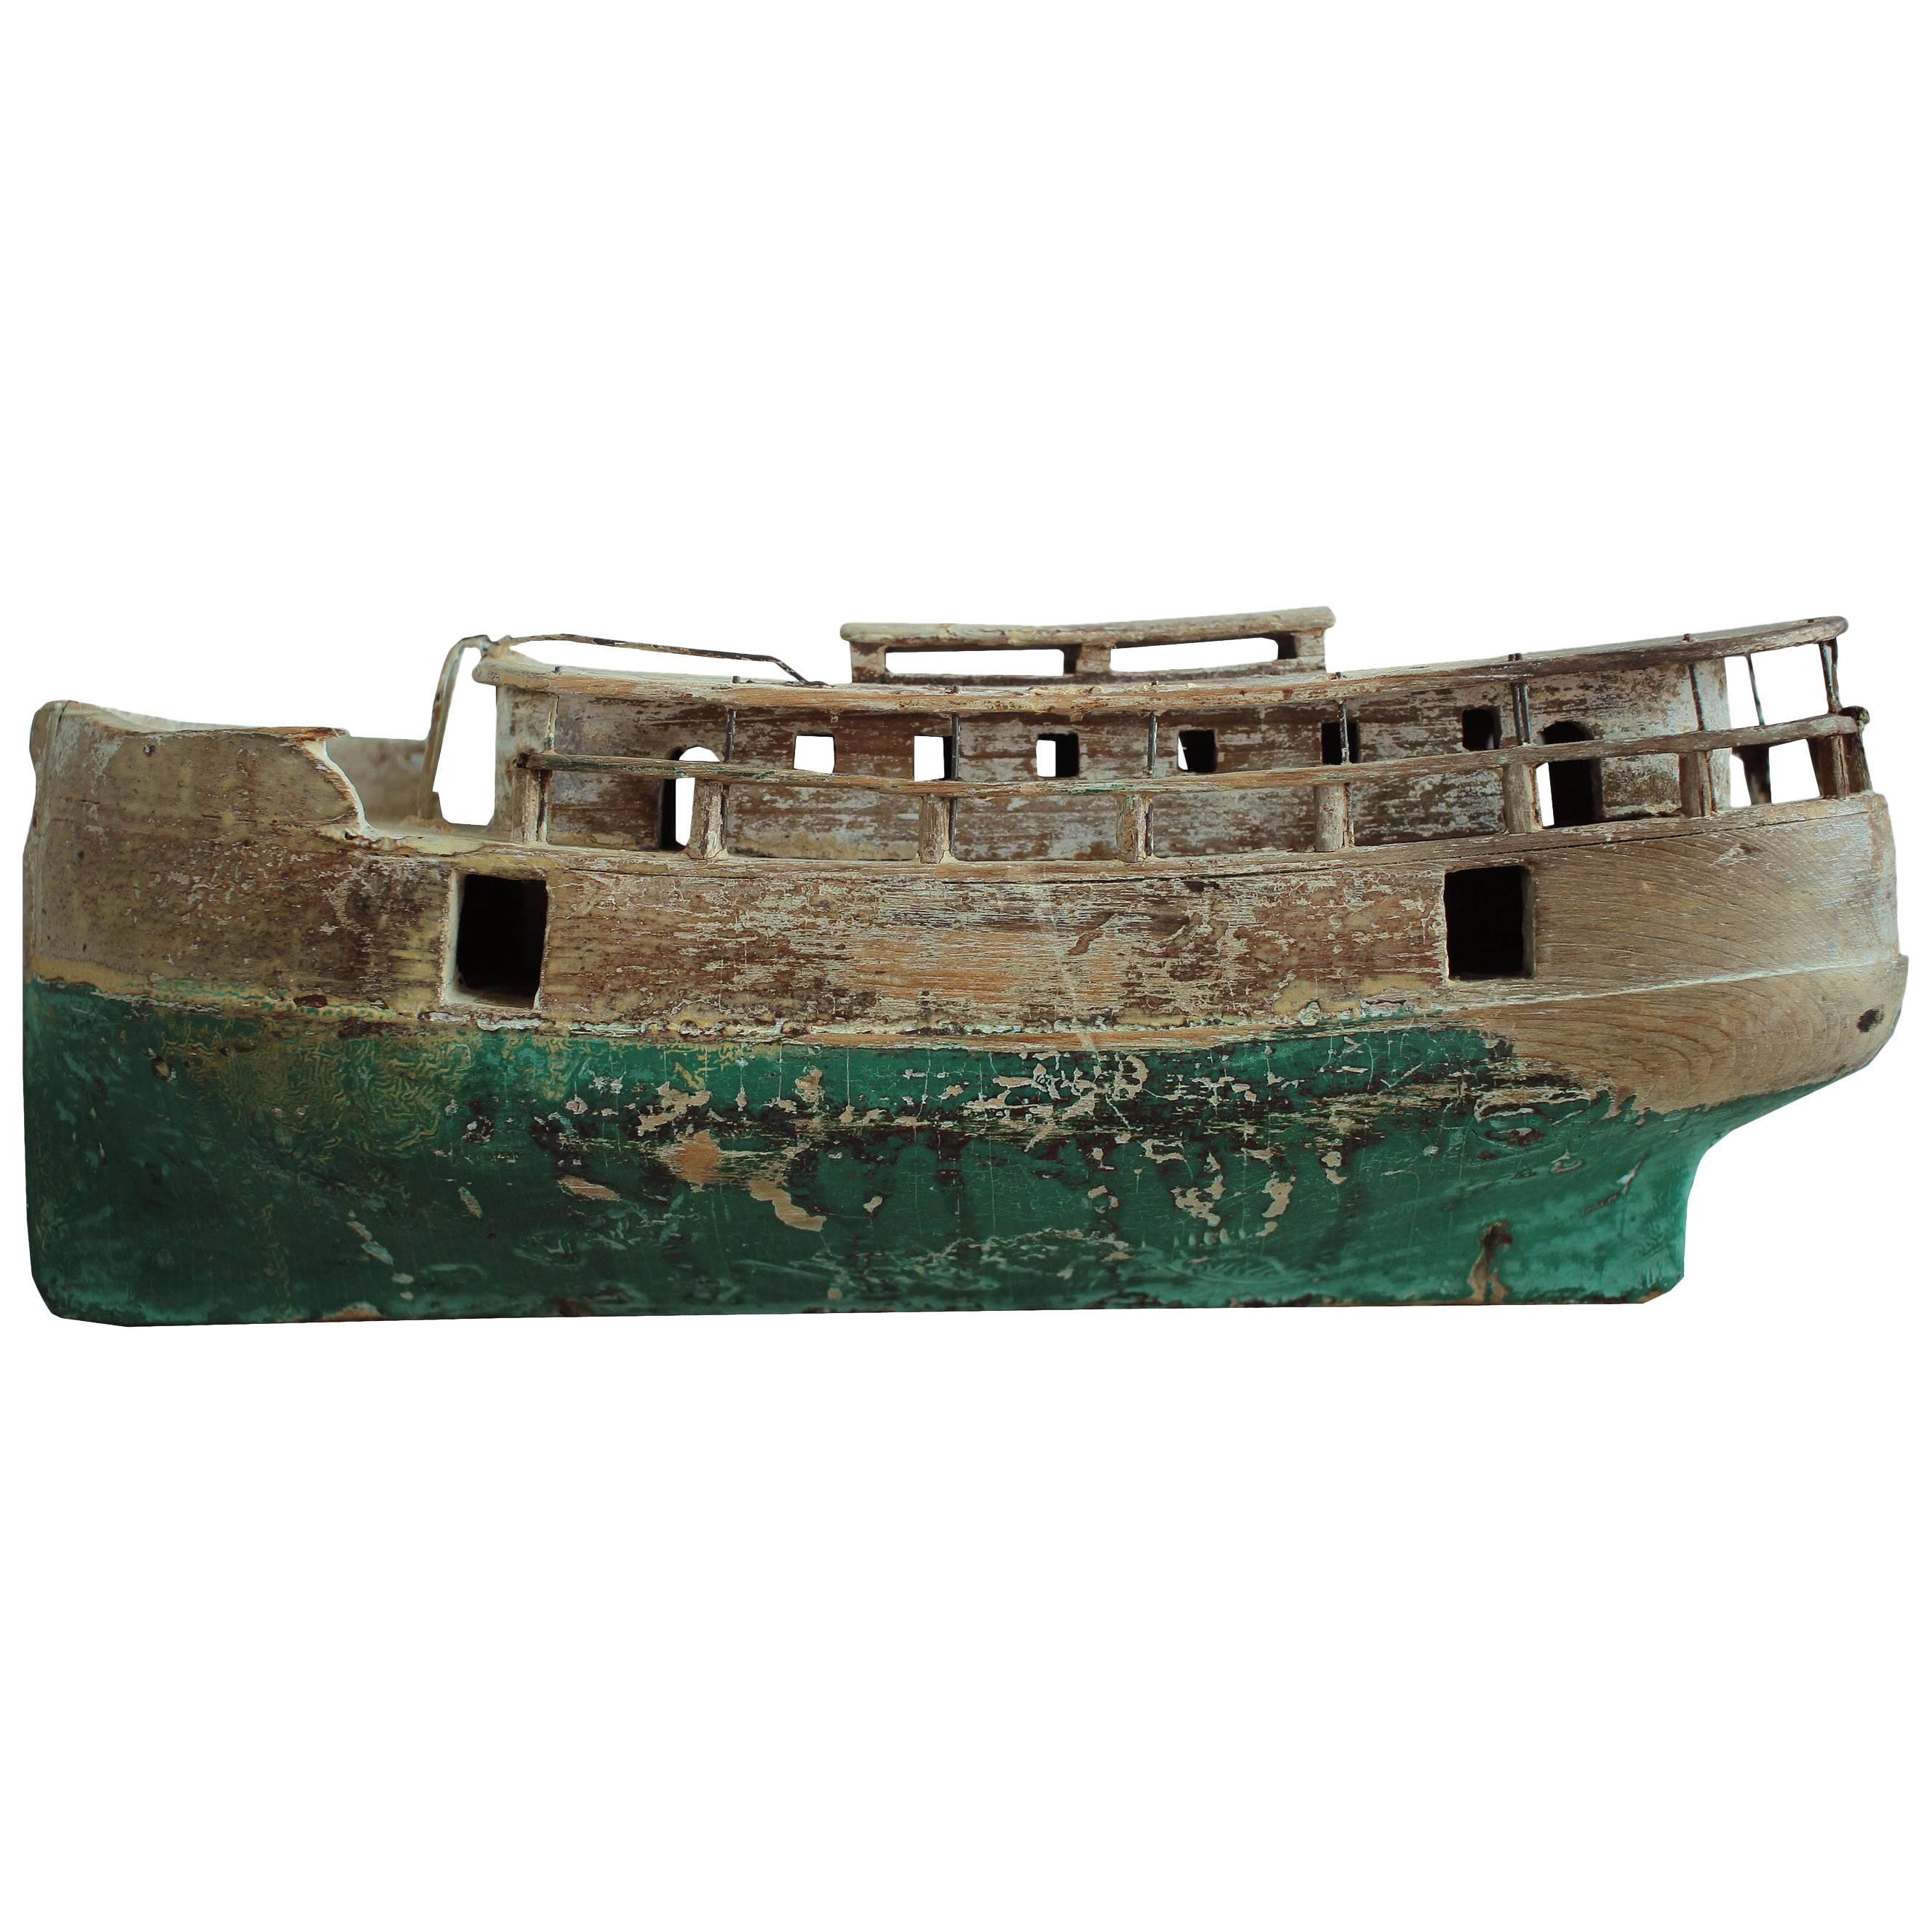 Early Antique Model Boat